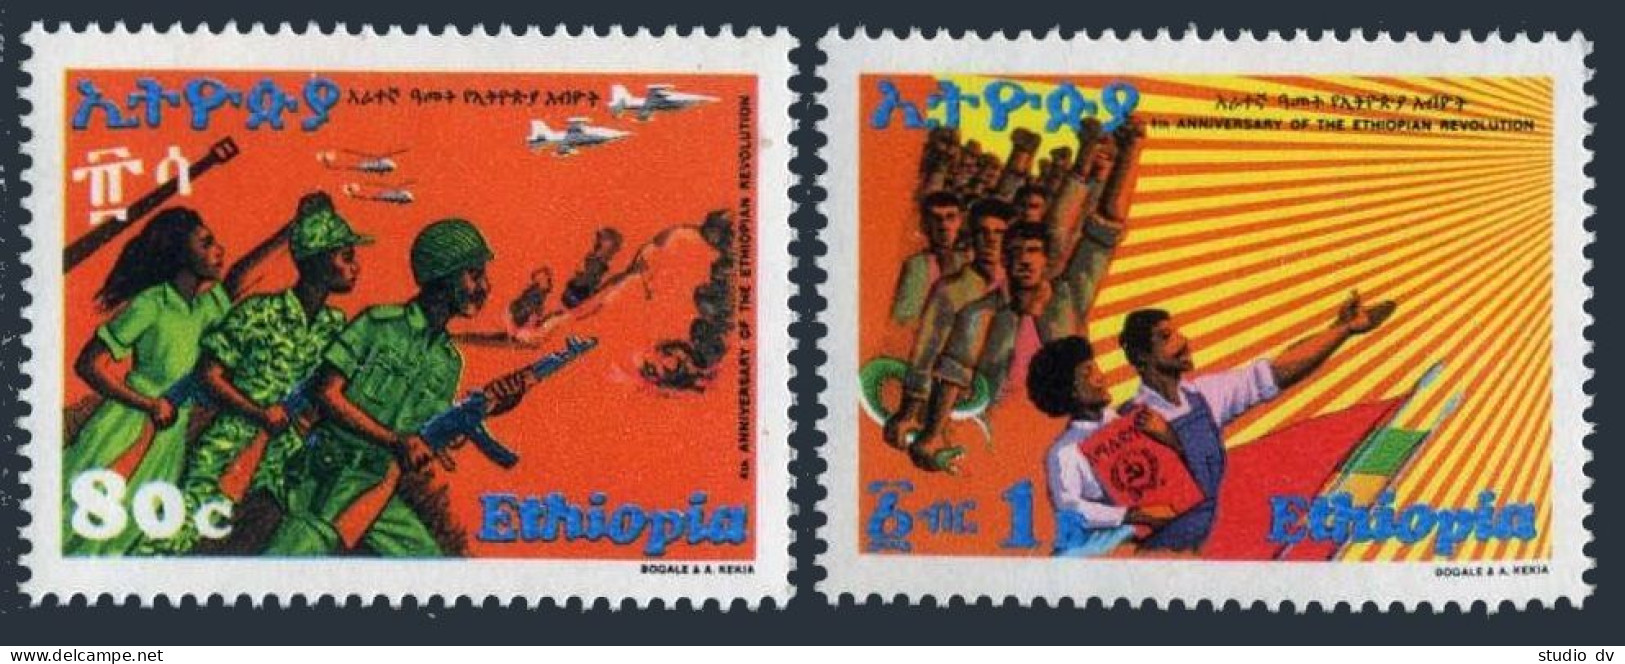 Ethiopia 894-895, MNH. Michel 980-981. Jet, Helicopters, Snake, Flags. 1978. - Ethiopia